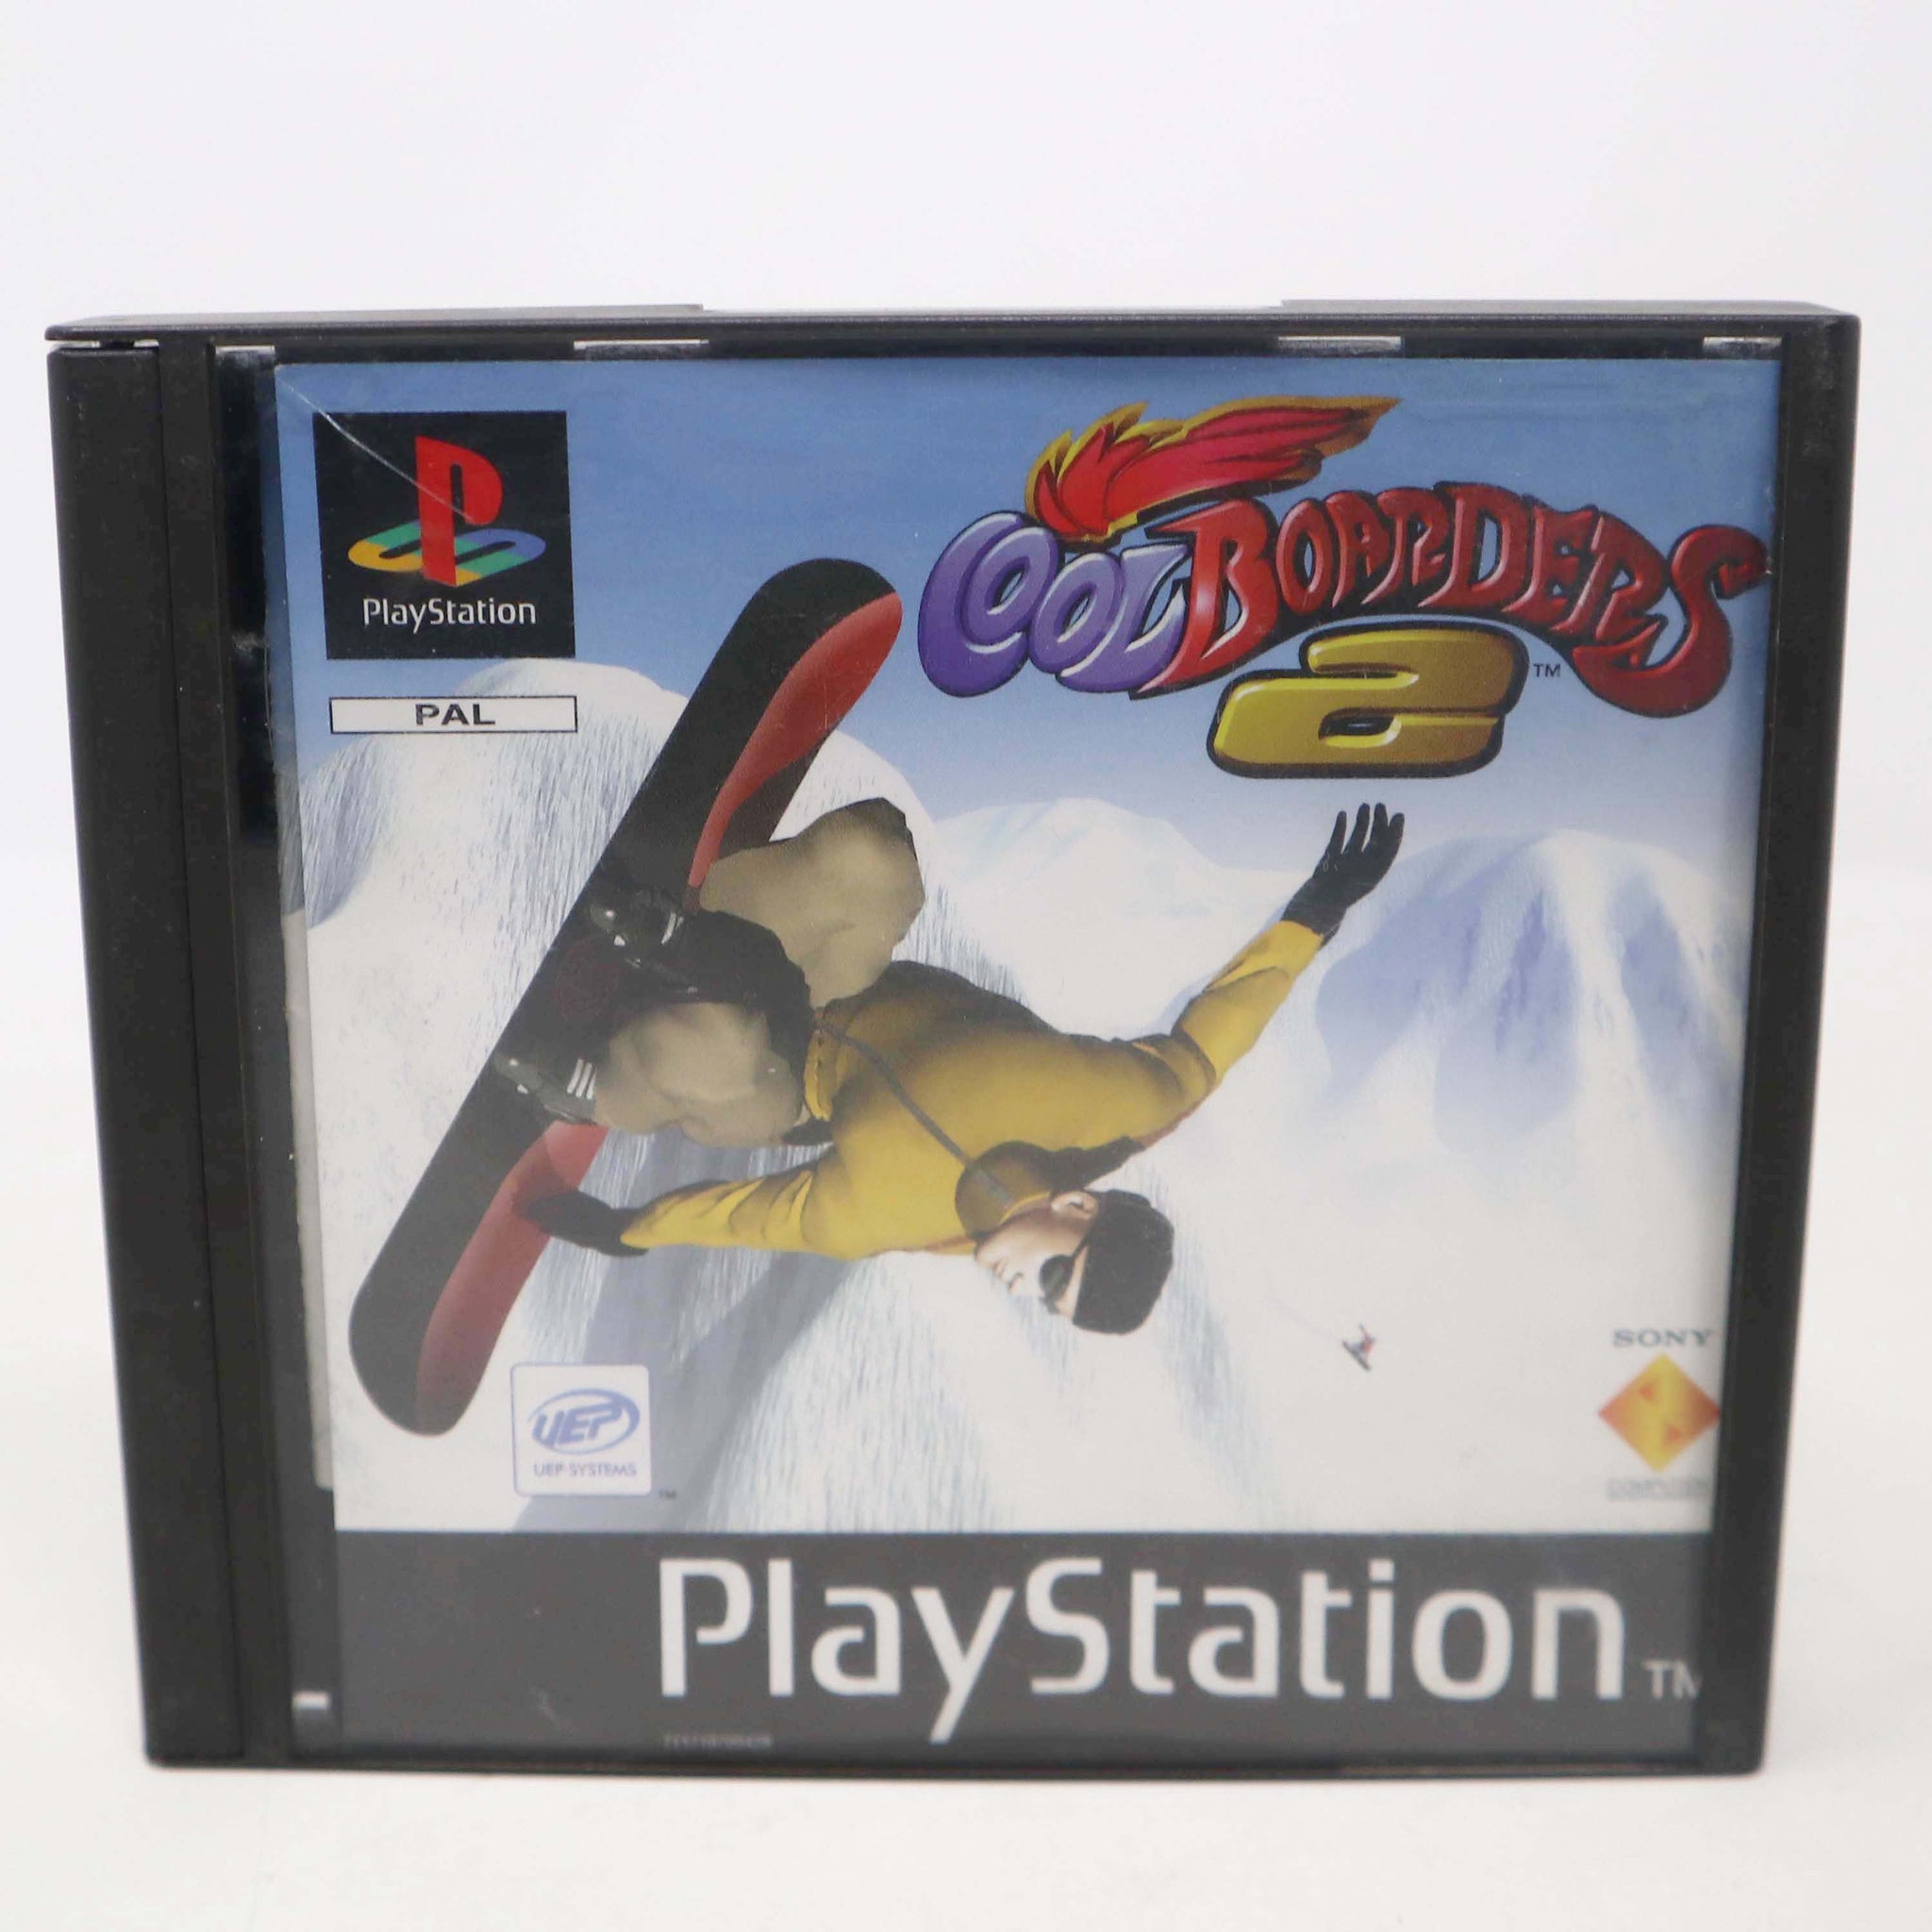 Vintage 1997 90s Playstation 1 PS1 Cool Boarders 2 Video Game Pal 1-2 Players Sport Simulation